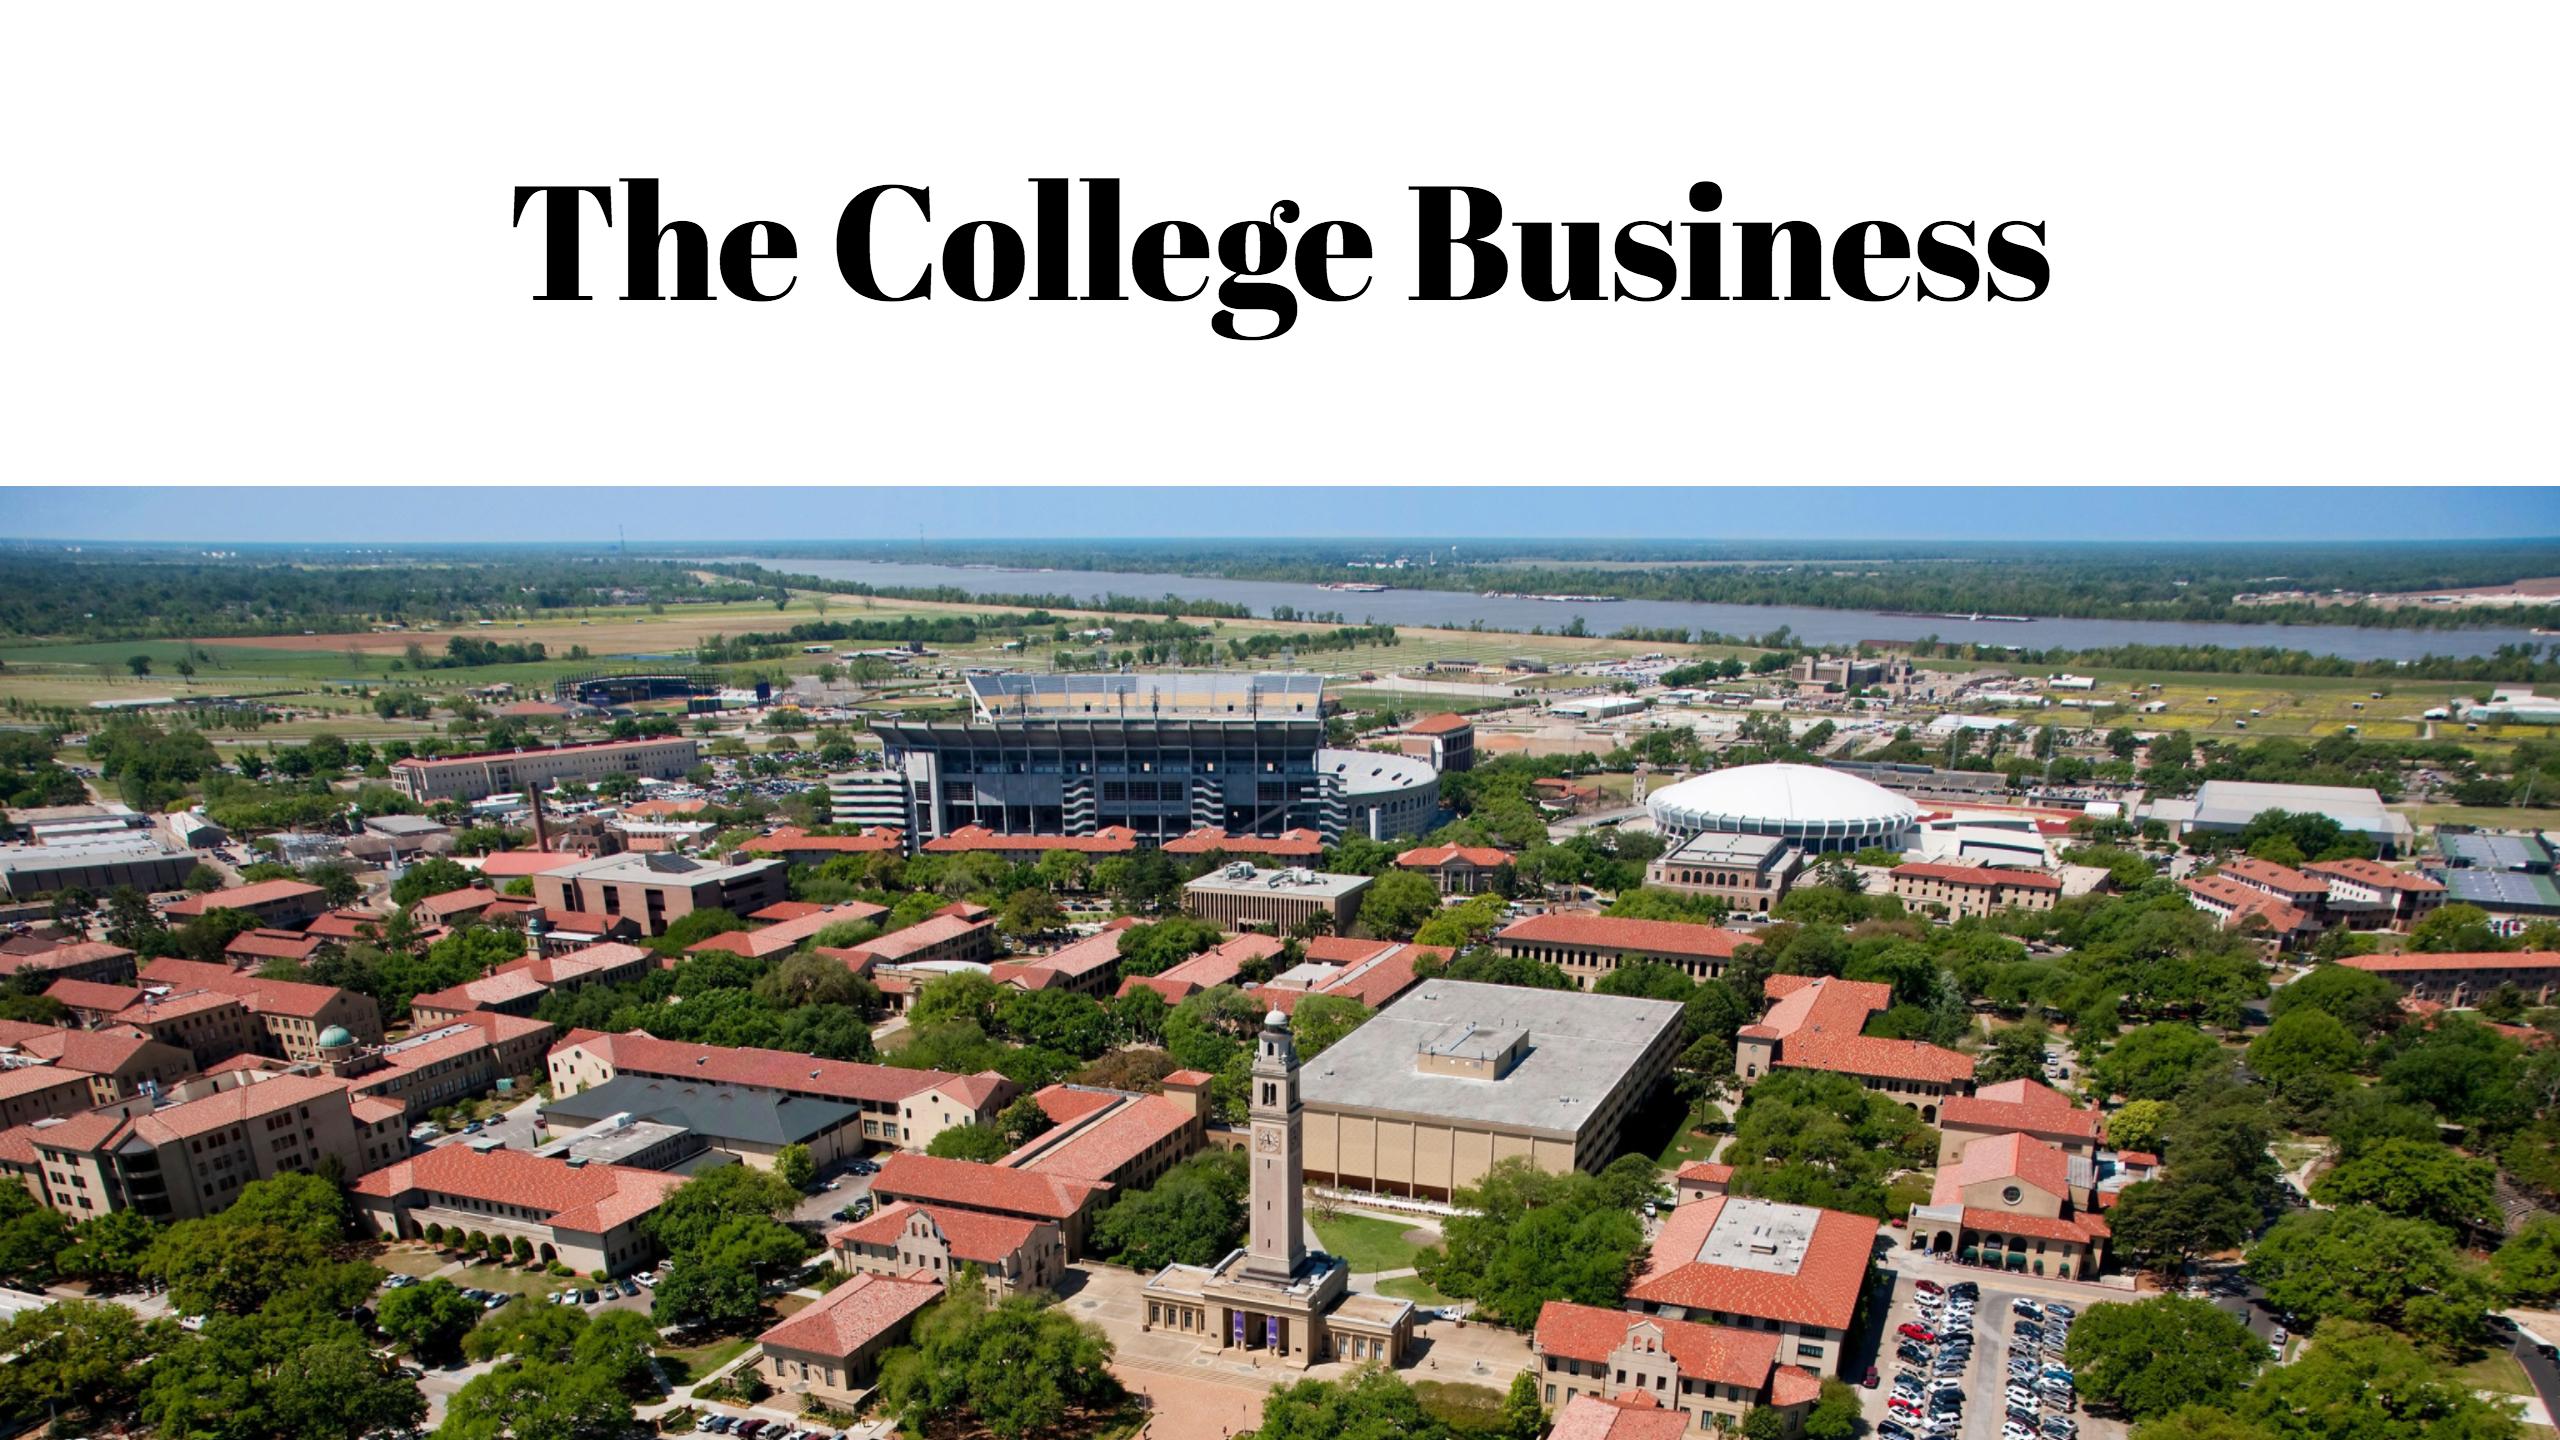 The College Business